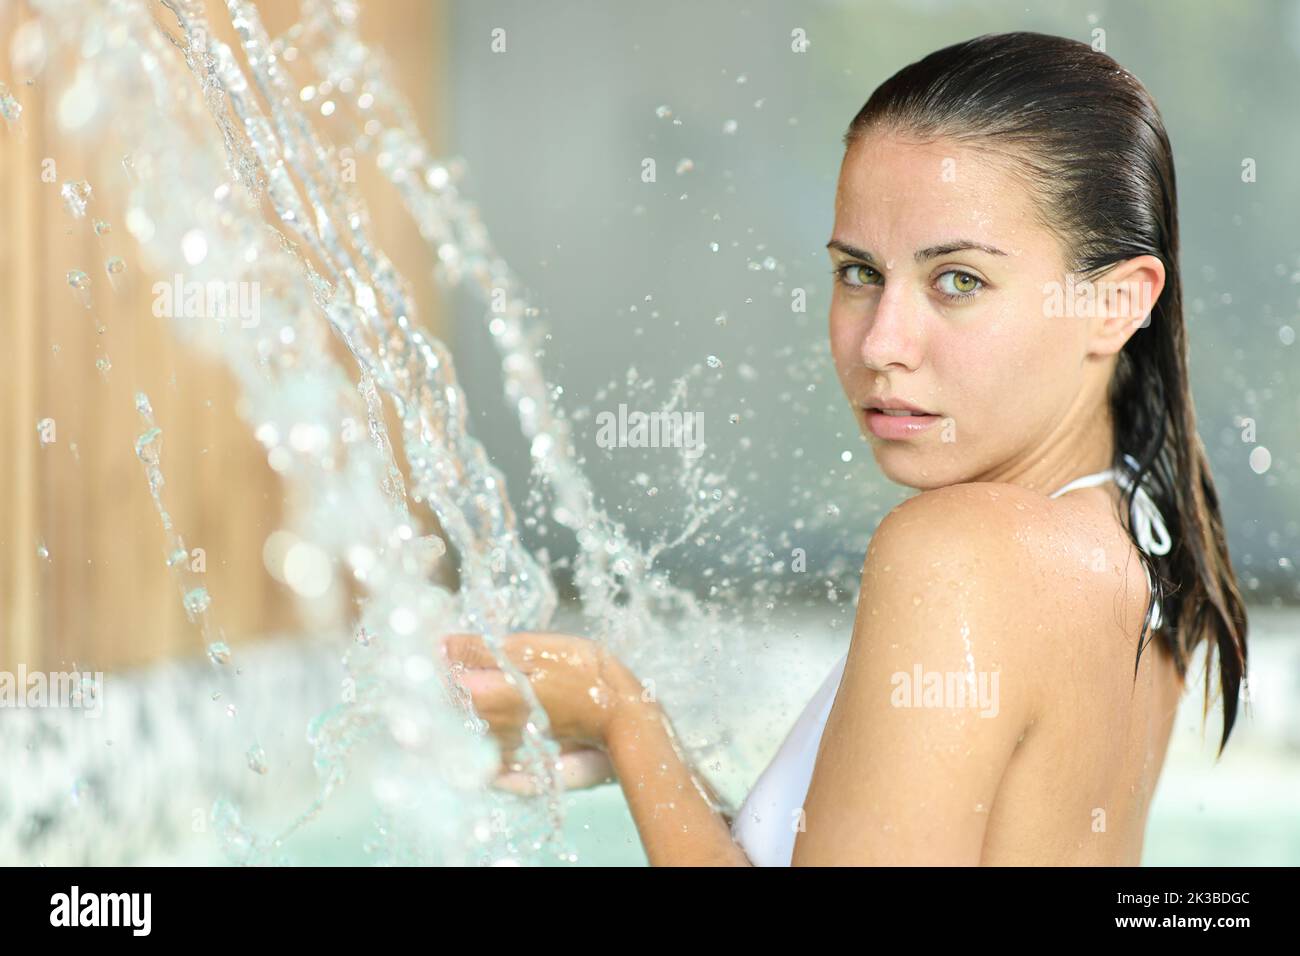 Beautiful woman bathing in spa looks at you under water jet Stock Photo